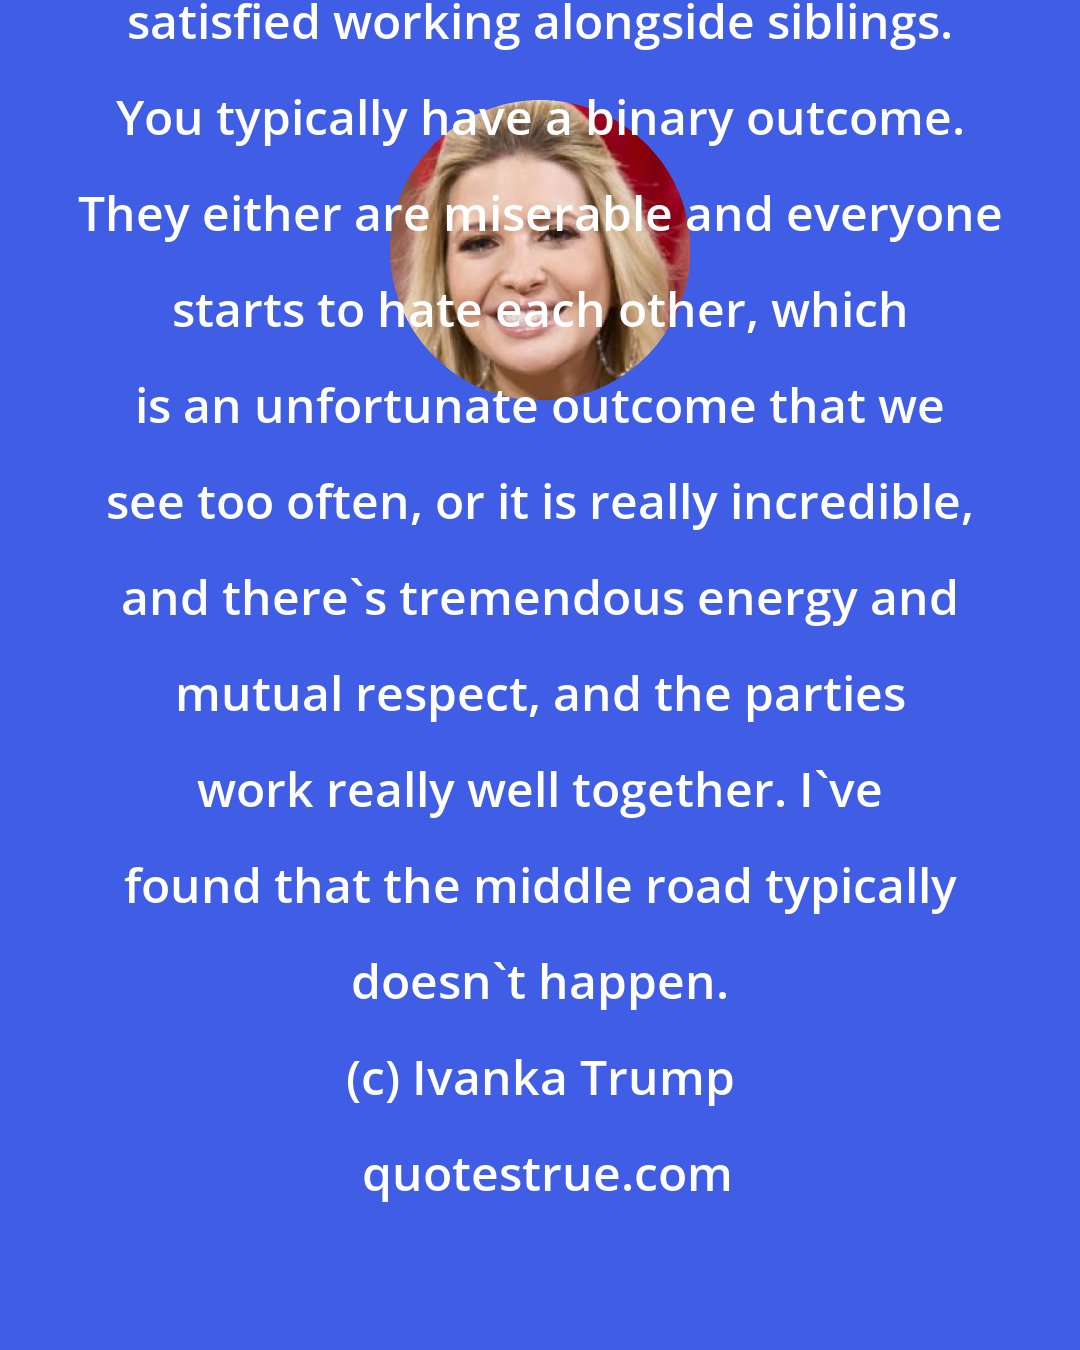 Ivanka Trump: I've seldom met somebody who is merely satisfied working alongside siblings. You typically have a binary outcome. They either are miserable and everyone starts to hate each other, which is an unfortunate outcome that we see too often, or it is really incredible, and there's tremendous energy and mutual respect, and the parties work really well together. I've found that the middle road typically doesn't happen.